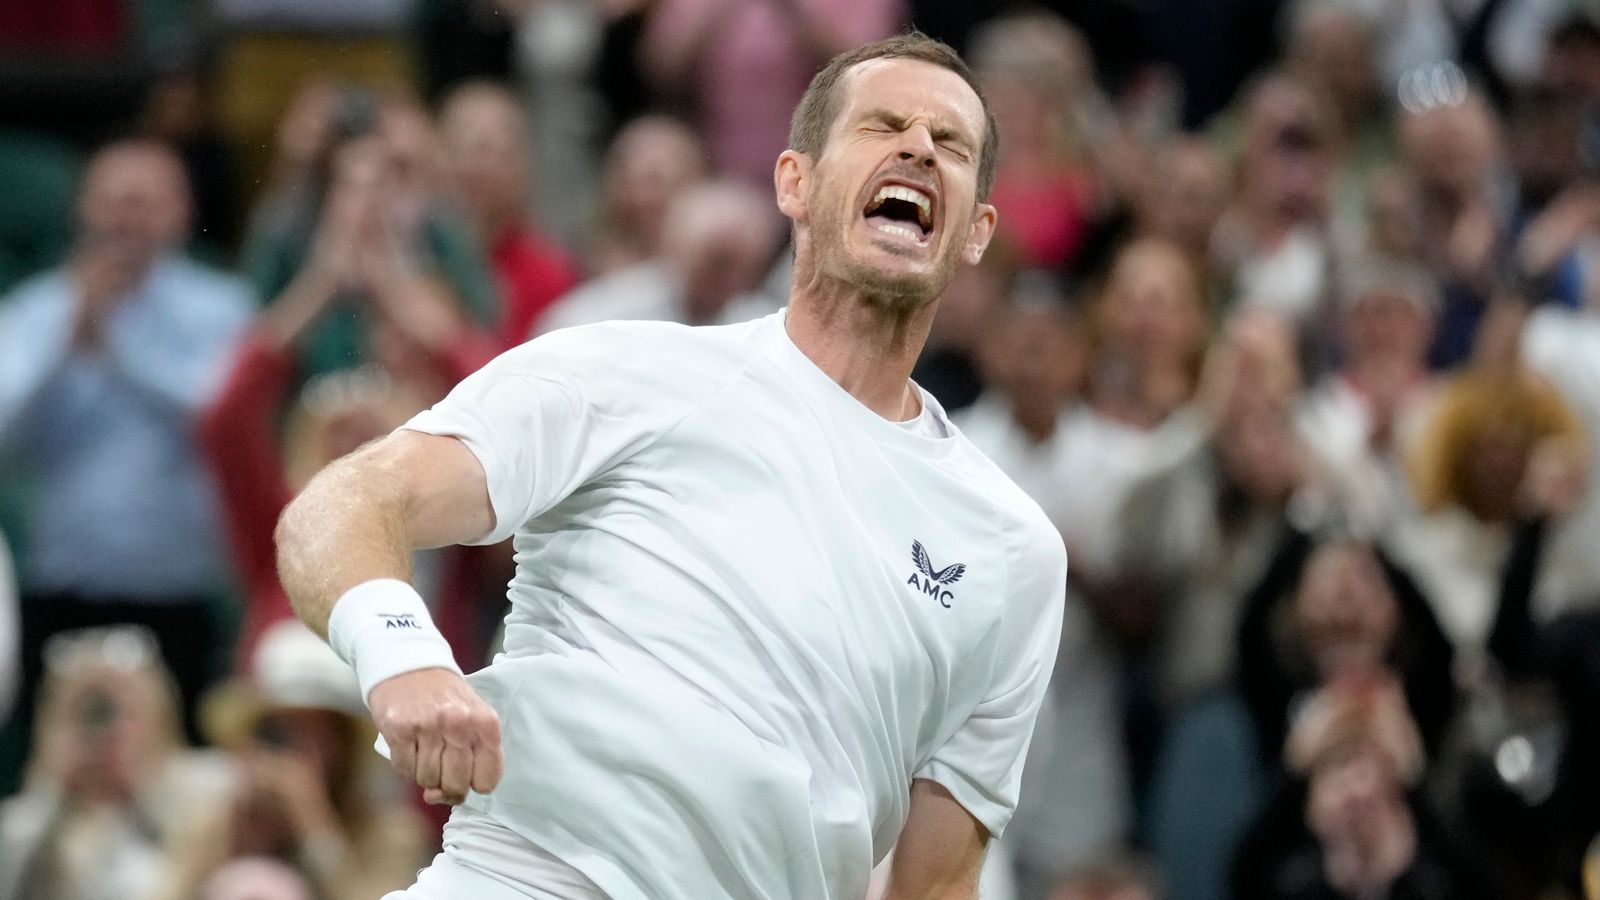 Andy Murray fights back to beat James Duckworth in Wimbledon first round | Tennis News